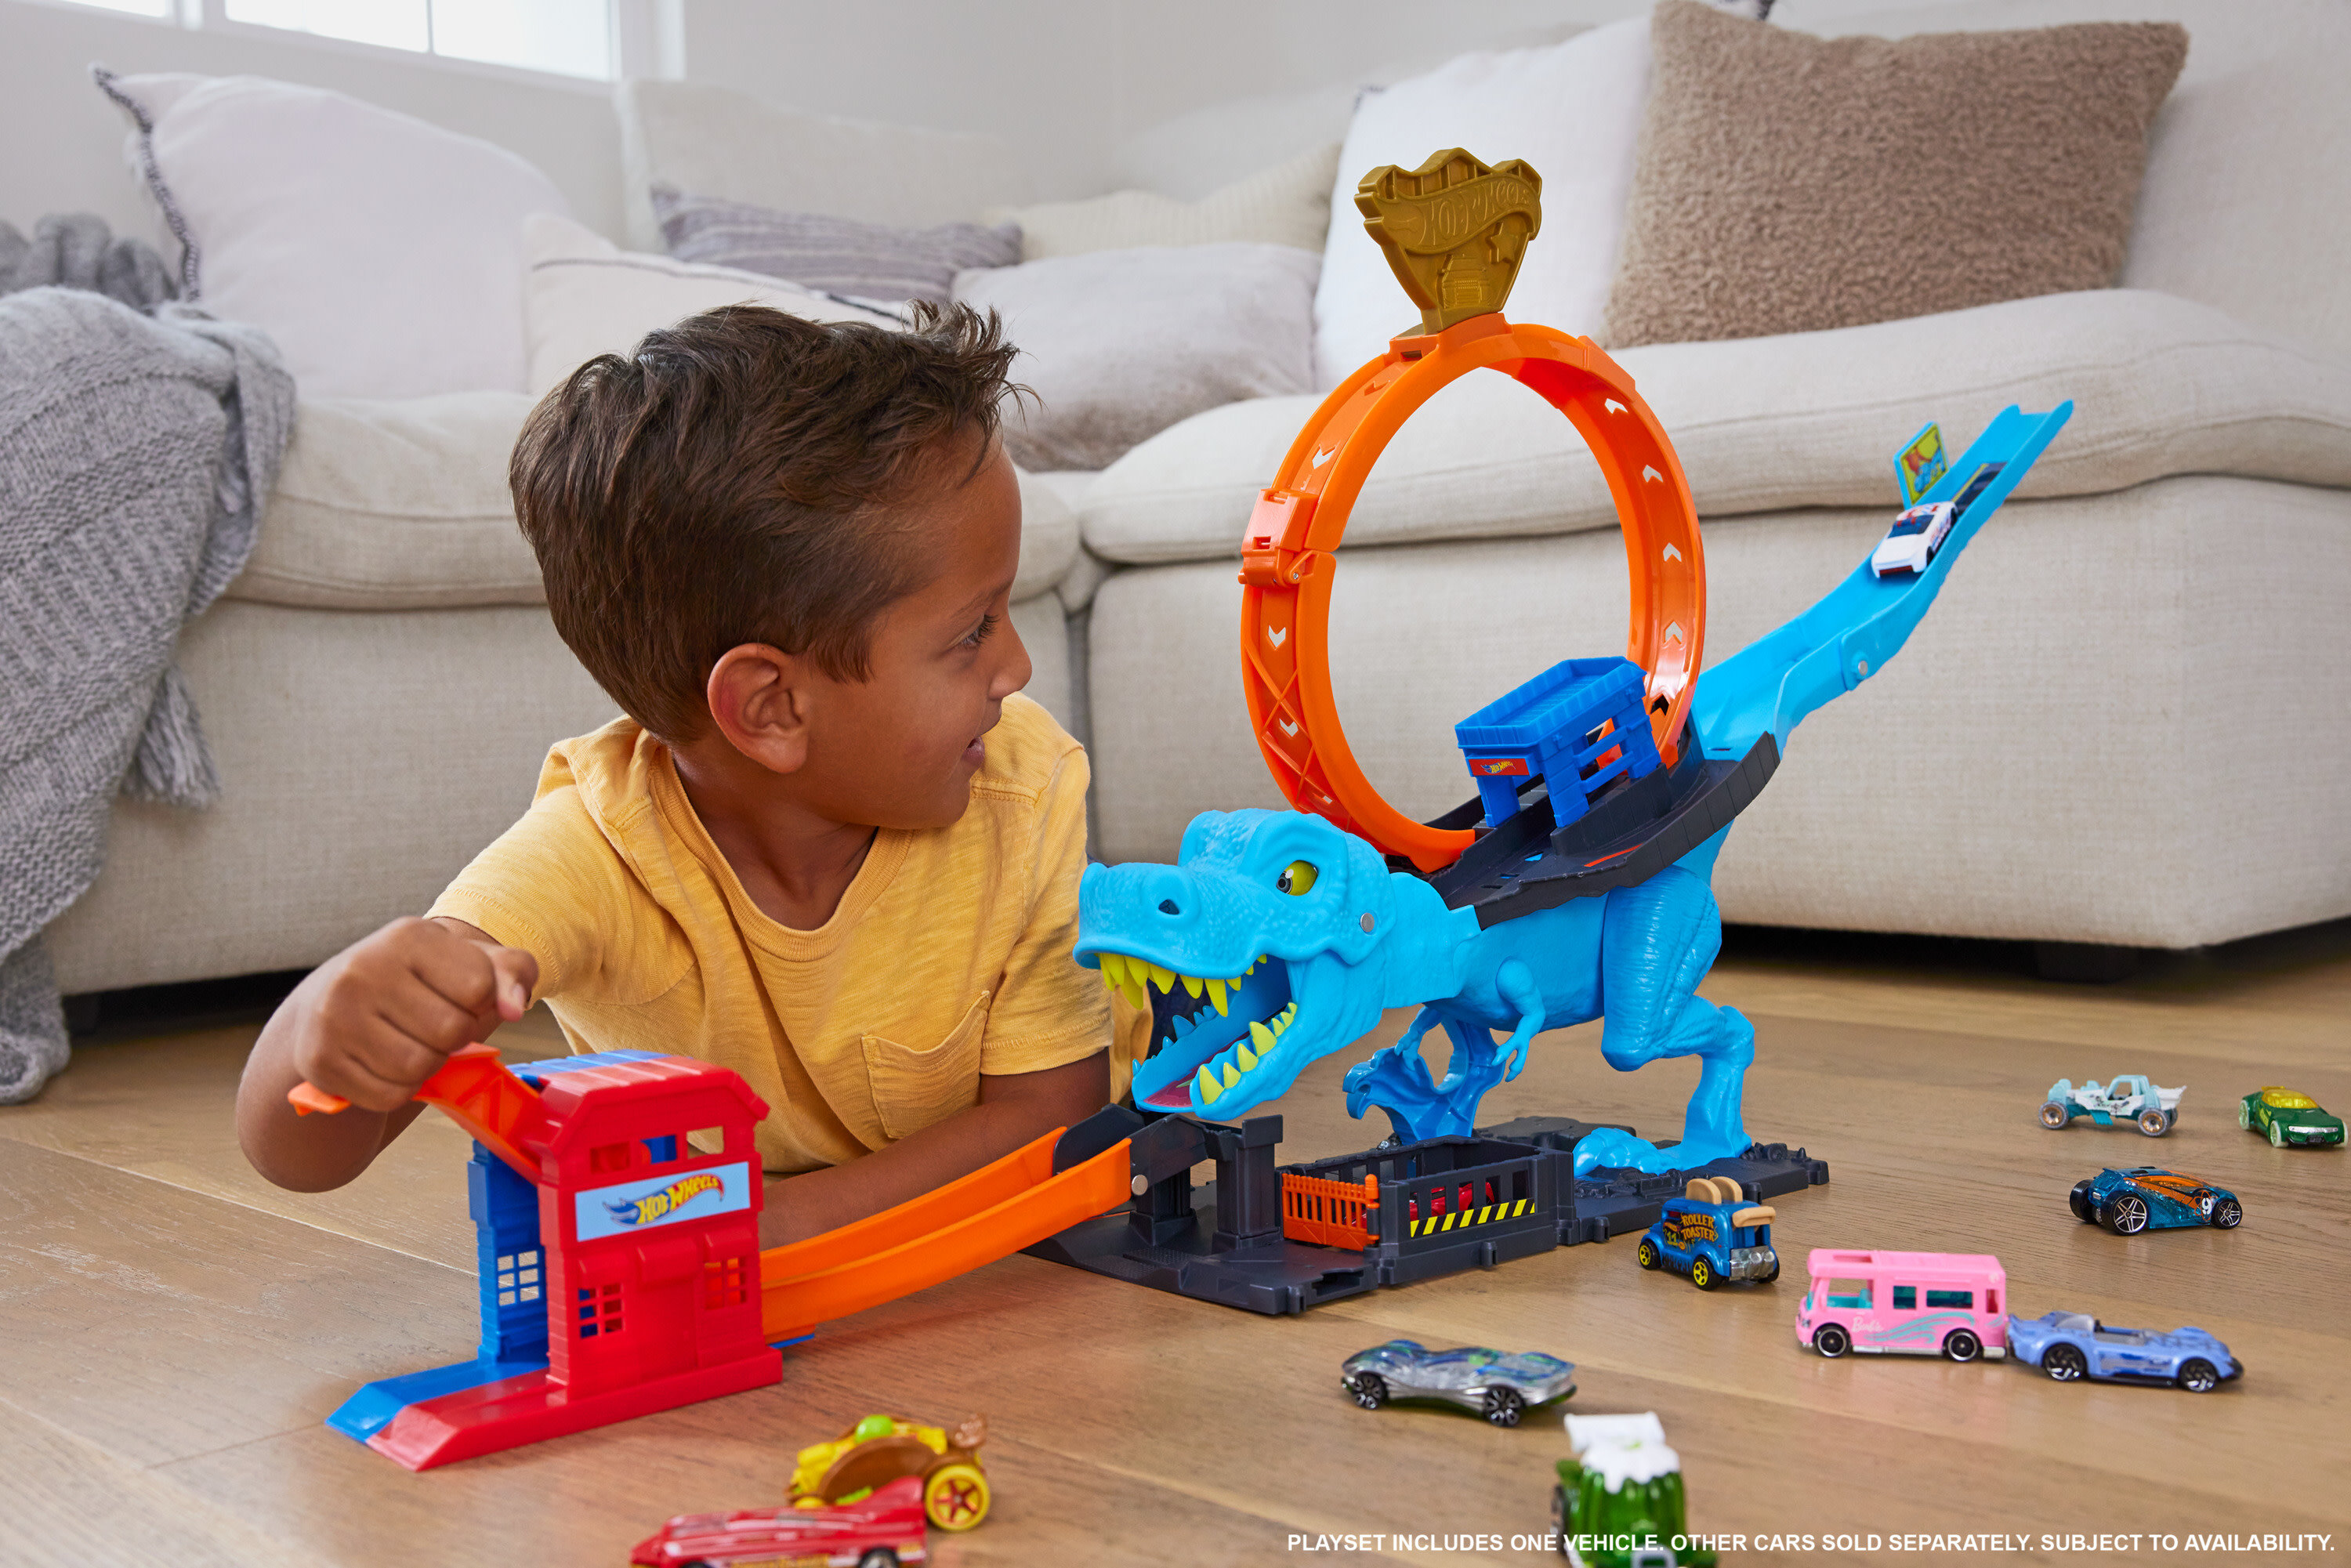 Hot Wheels City T-Rex Dinosaur Chomp-Down Track Set with a Huge Loop & 1:64 Scale Toy Car for Age 3 - 5 - image 3 of 7